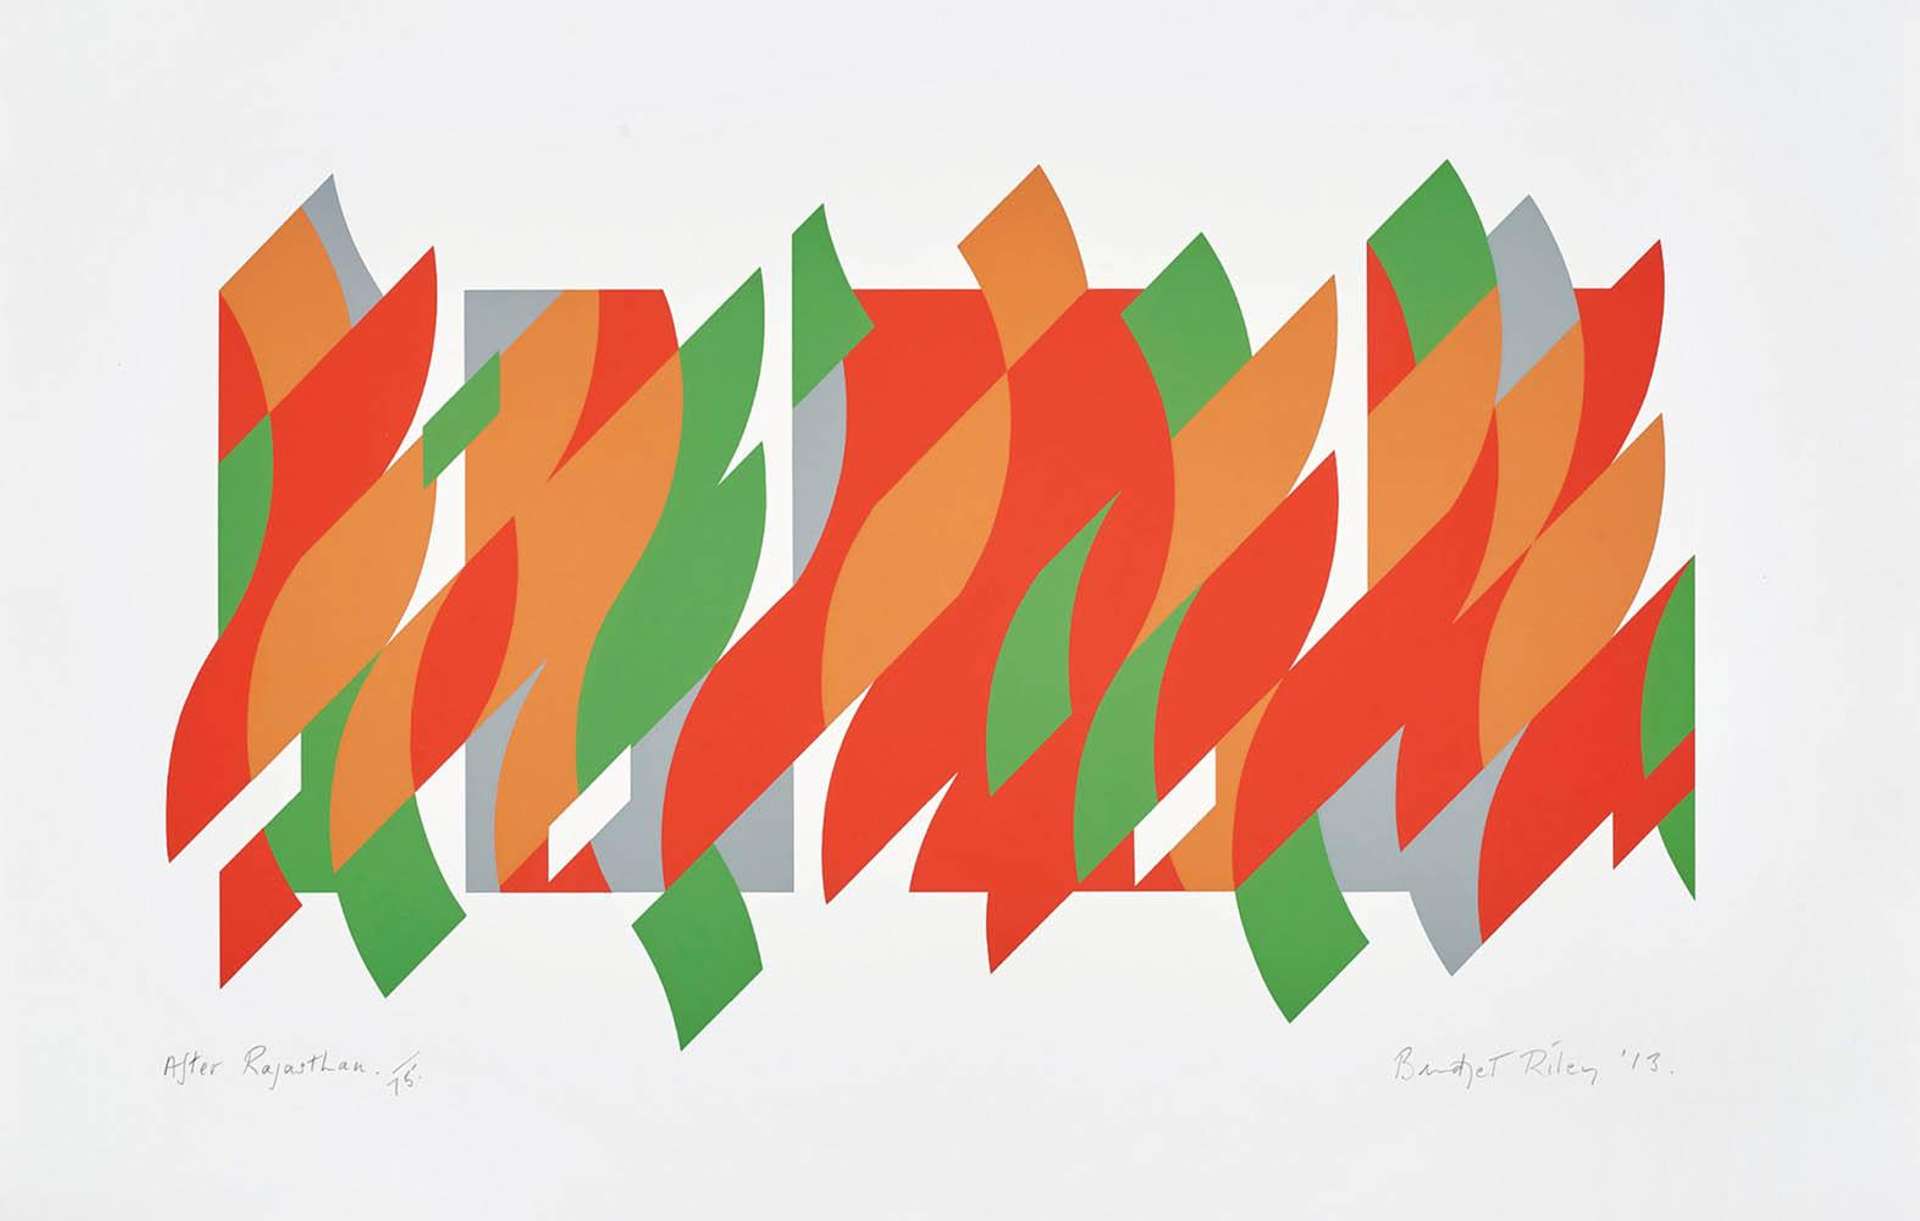 Bridget Riley’s After Rajasthan. An Op Art screenprint of combined green, red, orange, and grey geometric shapes against a white background.